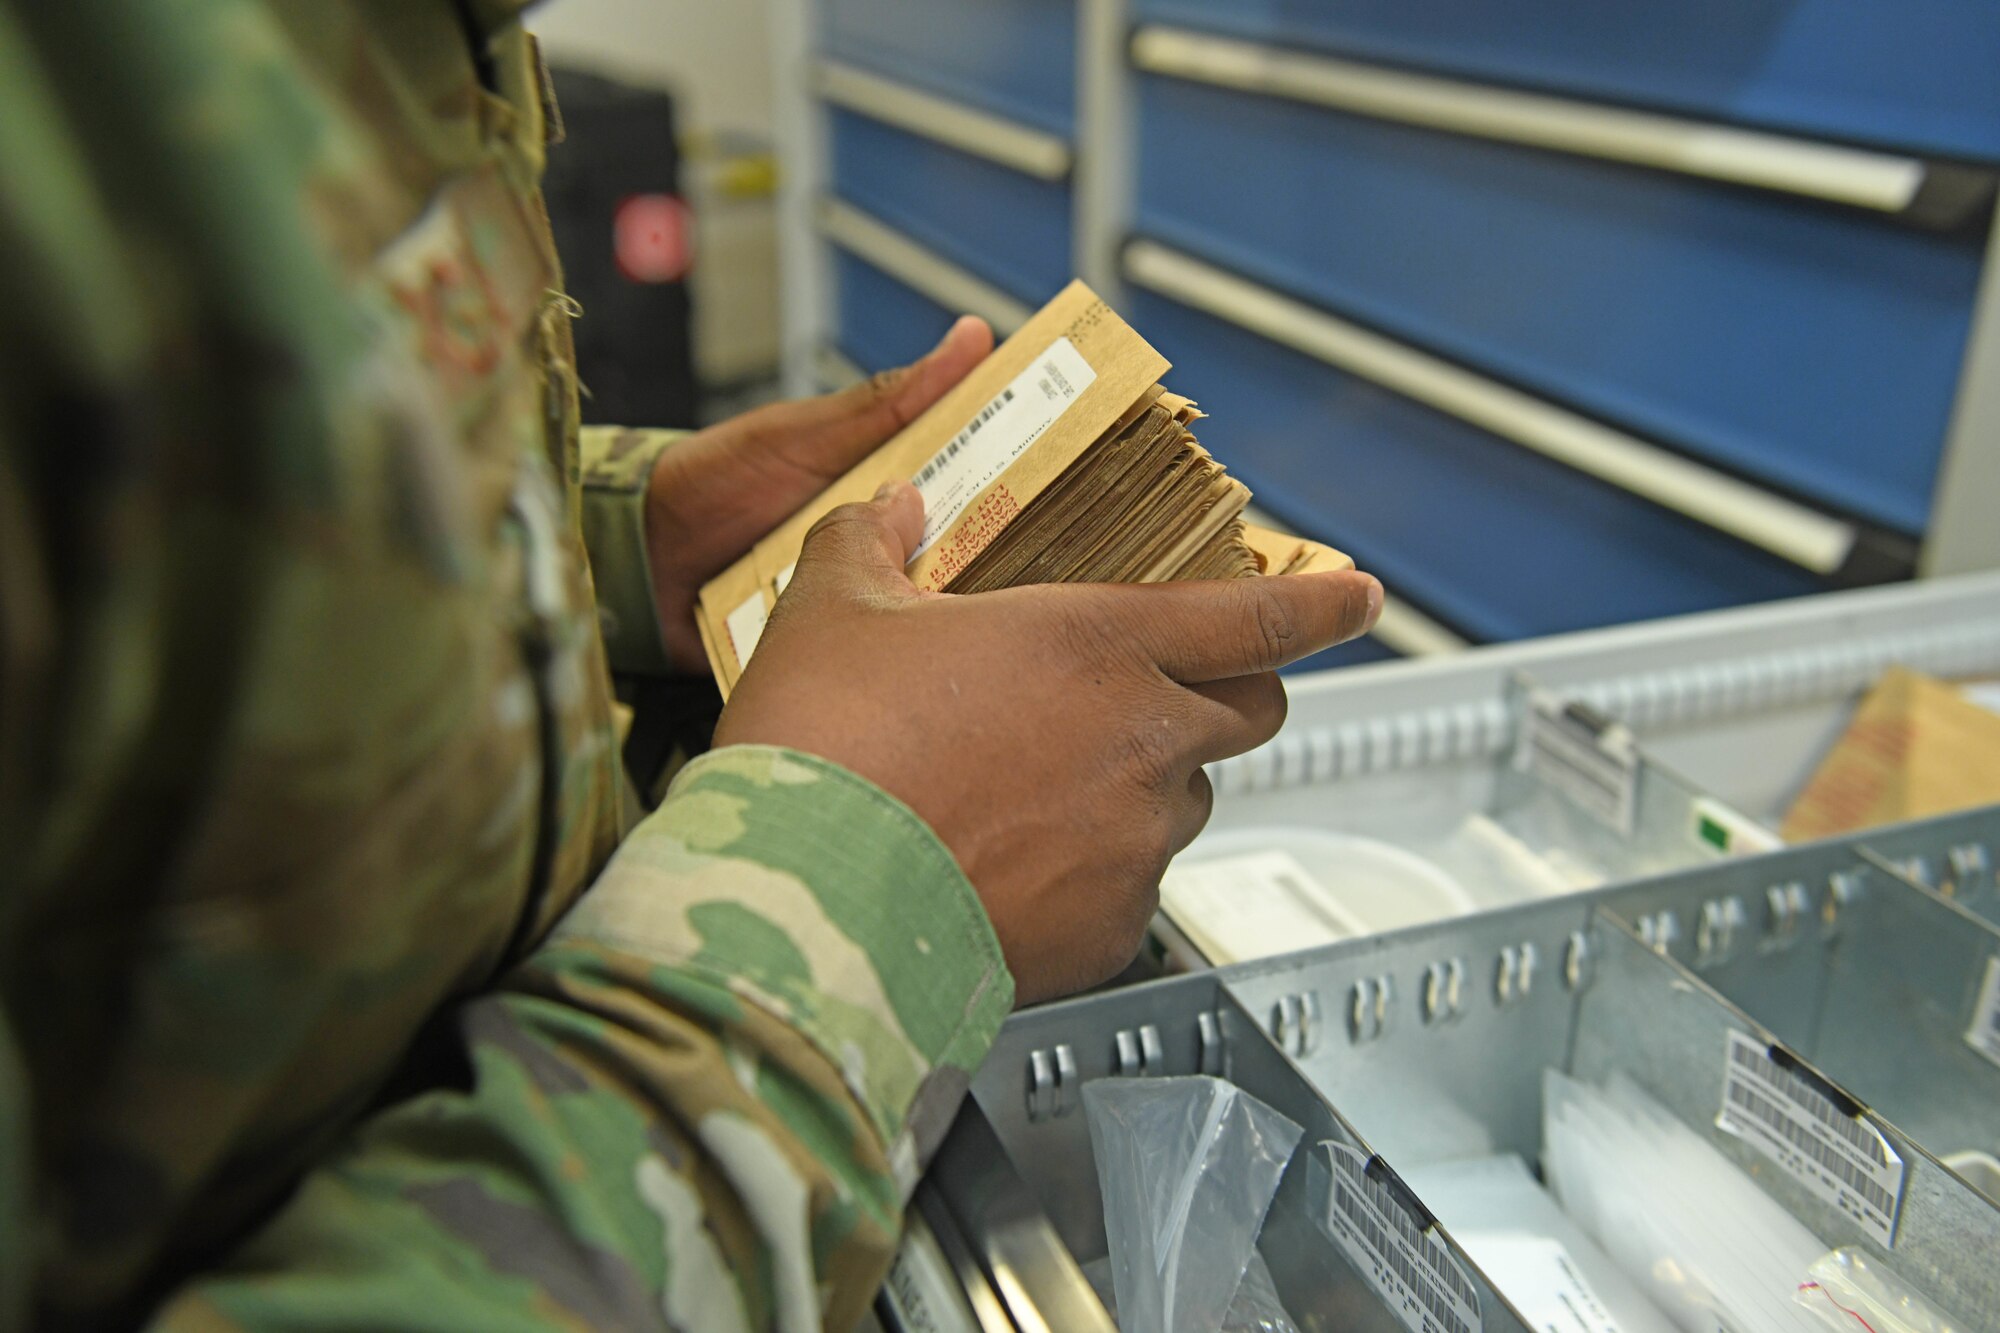 Staff Sgt. Jordan-Dean Morgan, 100th Logistics Readiness Squadron decentralized maintenance support supervisor, organizes bench stock maintenance supplies at RAF Mildenhall, England, July 31, 2019. The 100th LRS stood up the first KC-135 Stratotanker DMS section in U.S. Air Forces in Europe at RAF Mildenhall, England, in October 2019. (U.S. Air Force photo by Senior Airman Luke Milano)